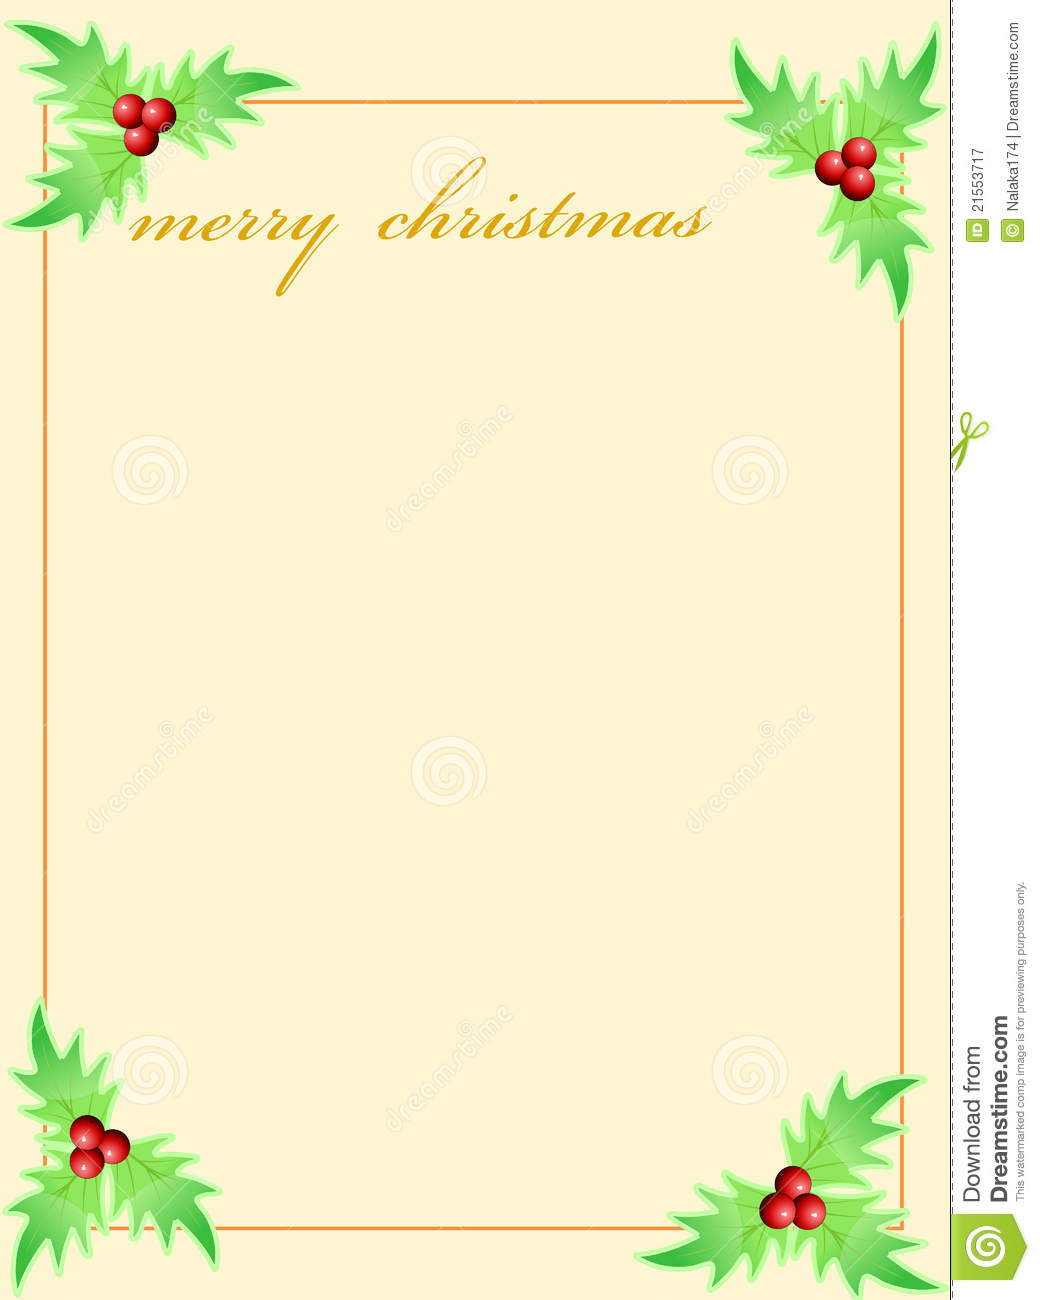 16 Holiday Greeting Card Template Images – Free Christmas Pertaining To Blank Christmas Card Templates Free